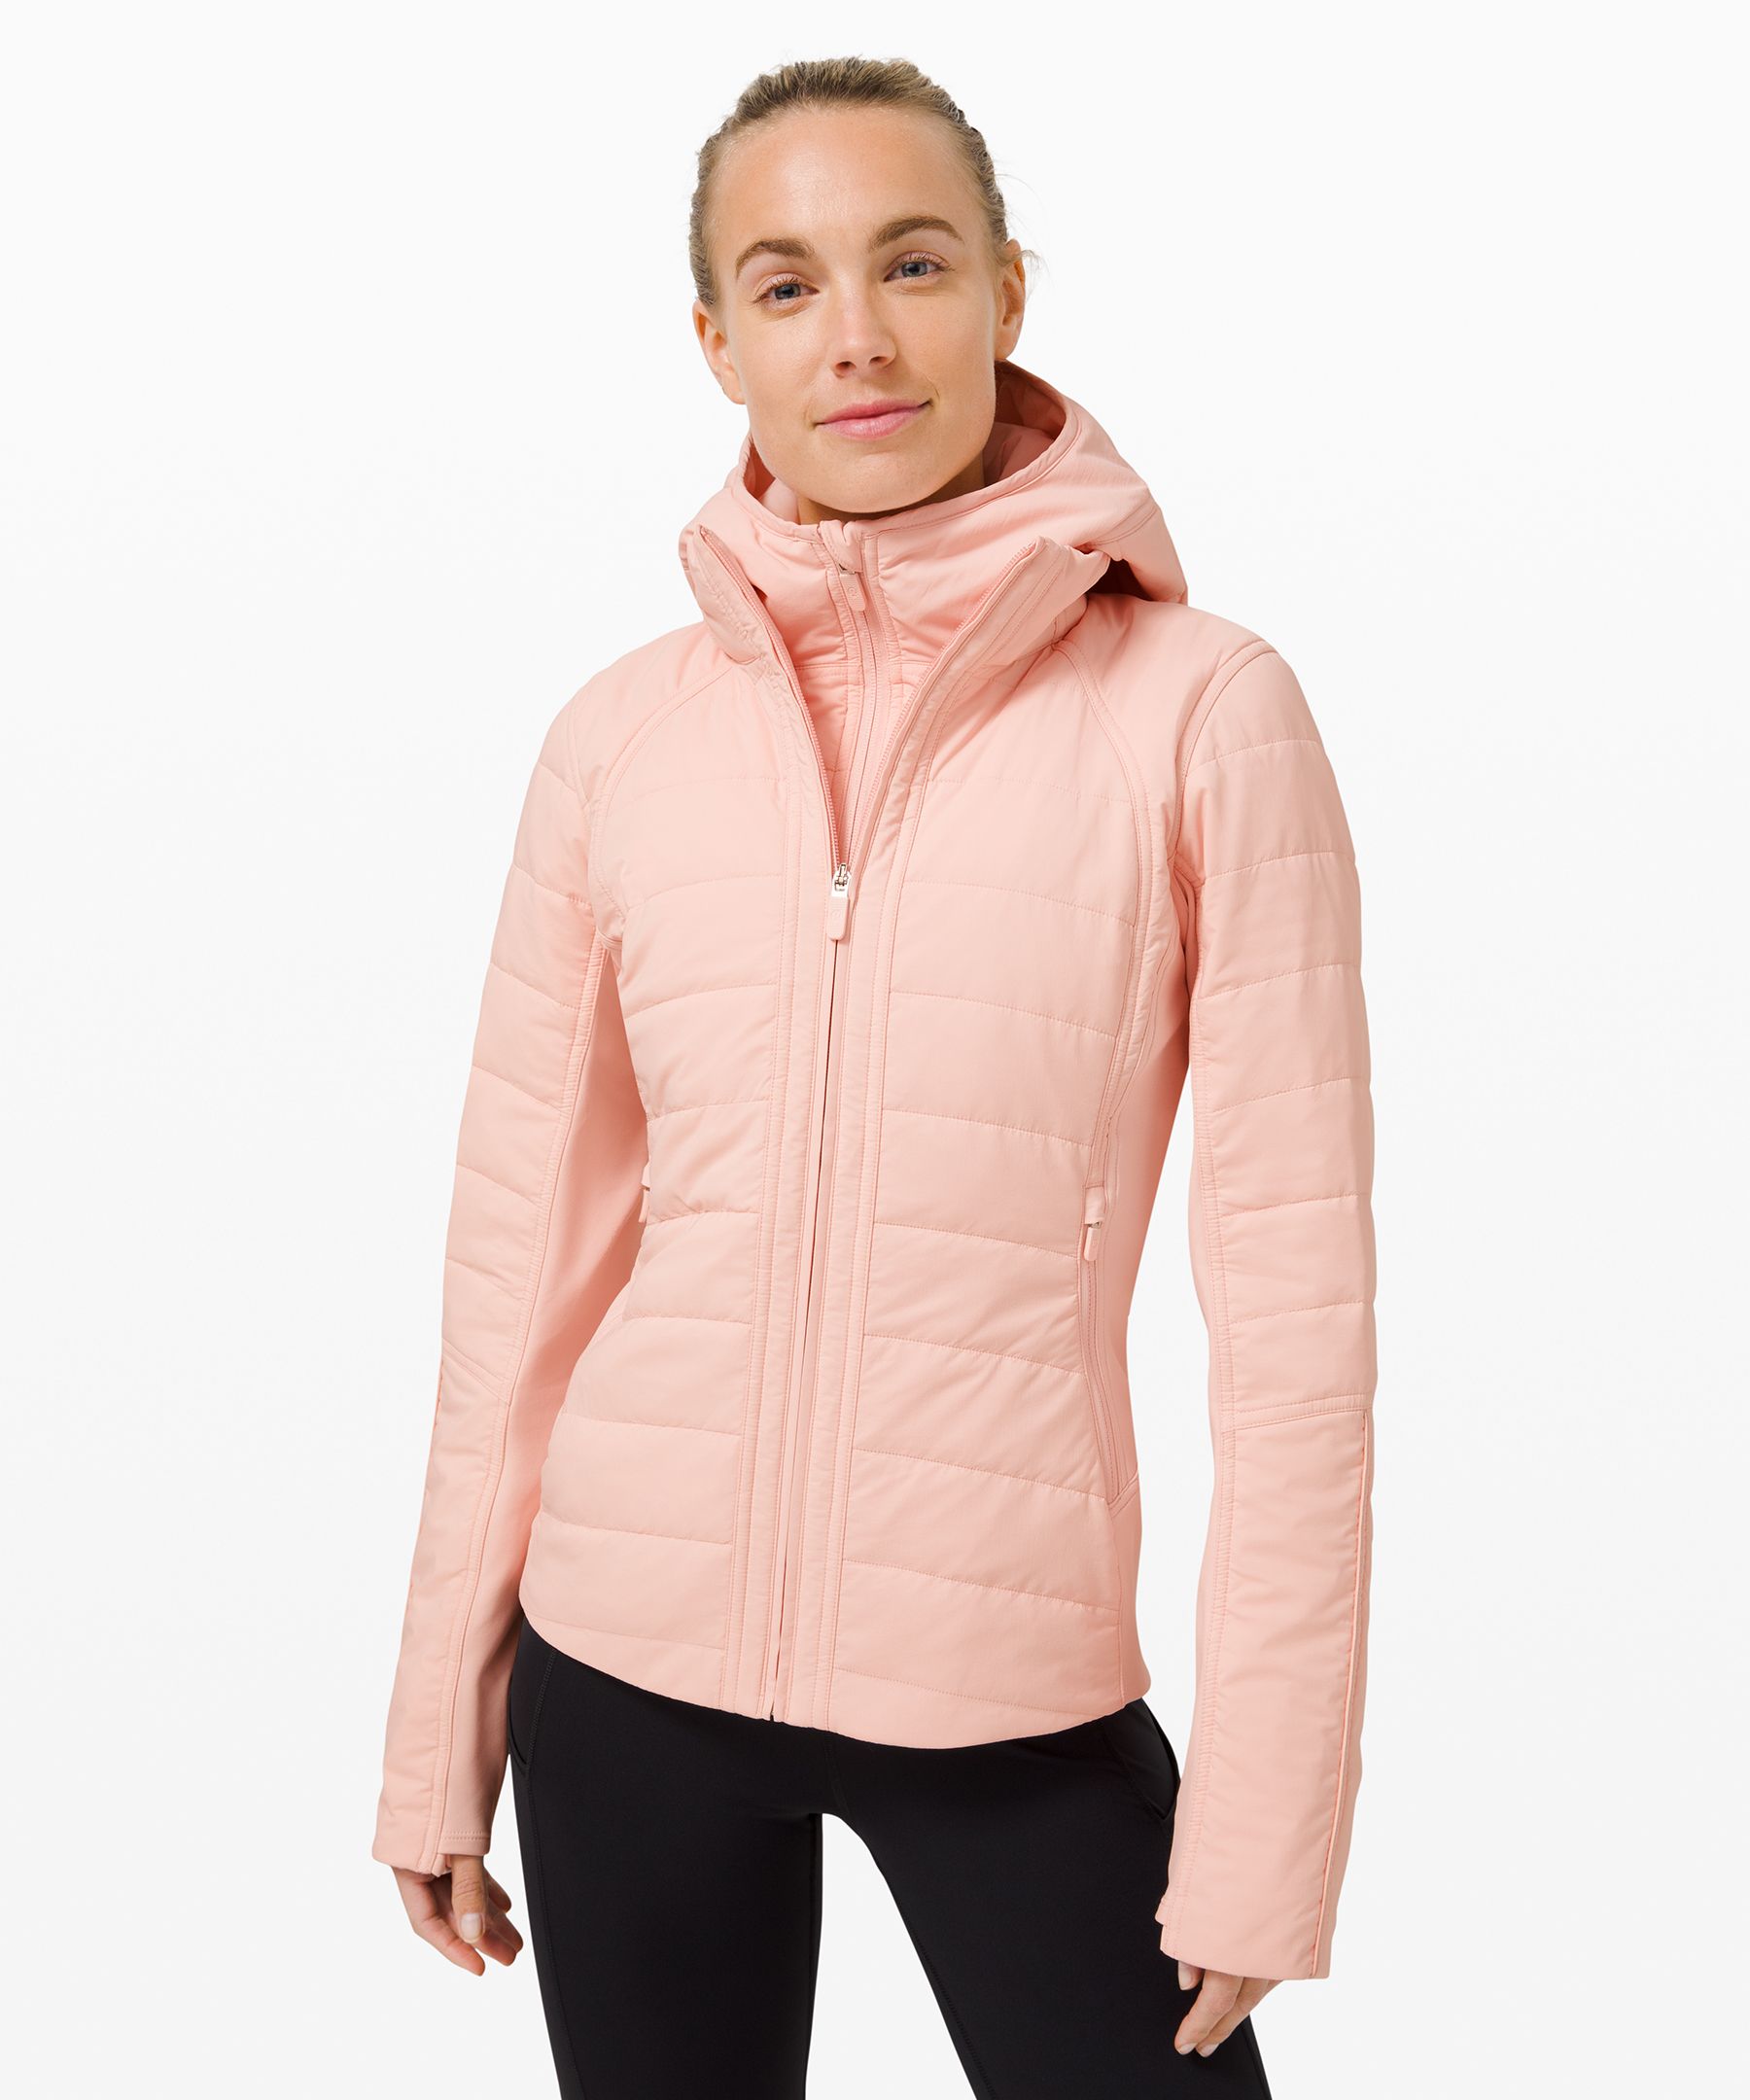 Another Mile Jacket | Women's Jackets + 